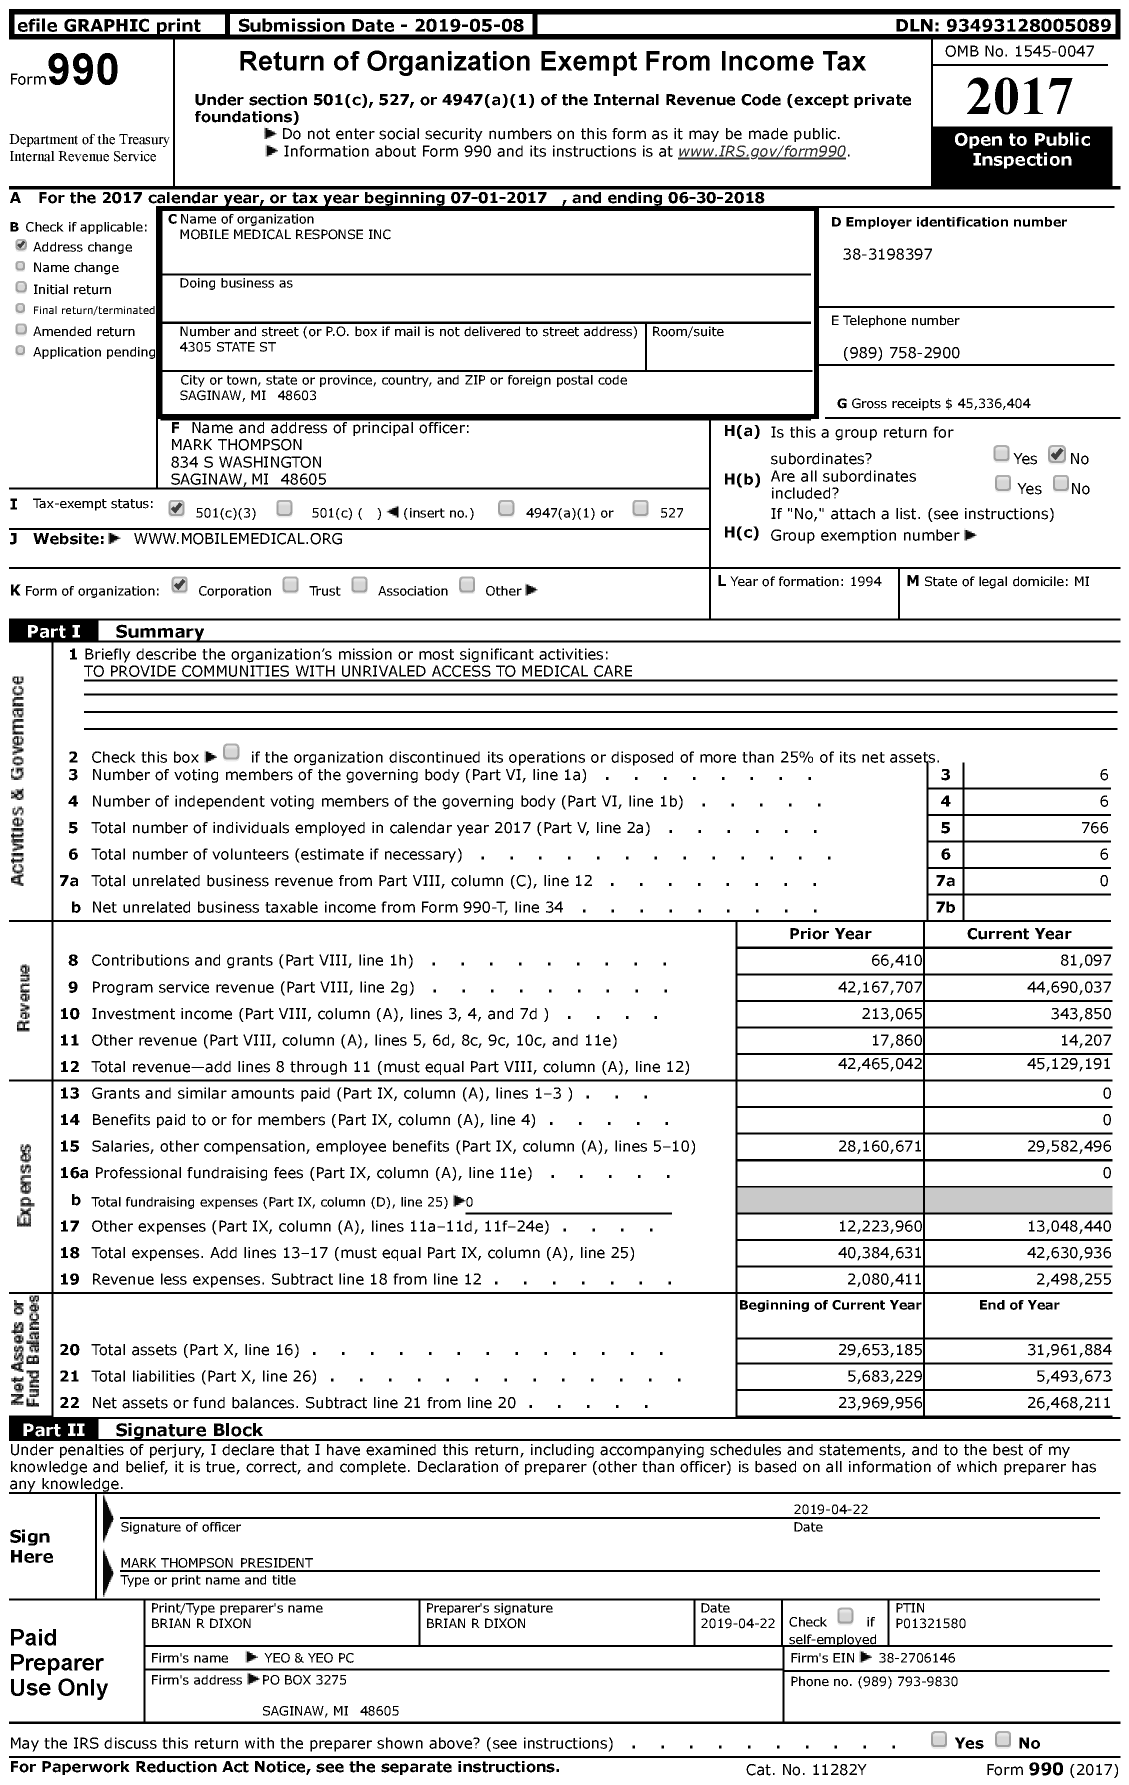 Image of first page of 2017 Form 990 for Mobile Medical Response (MMR)